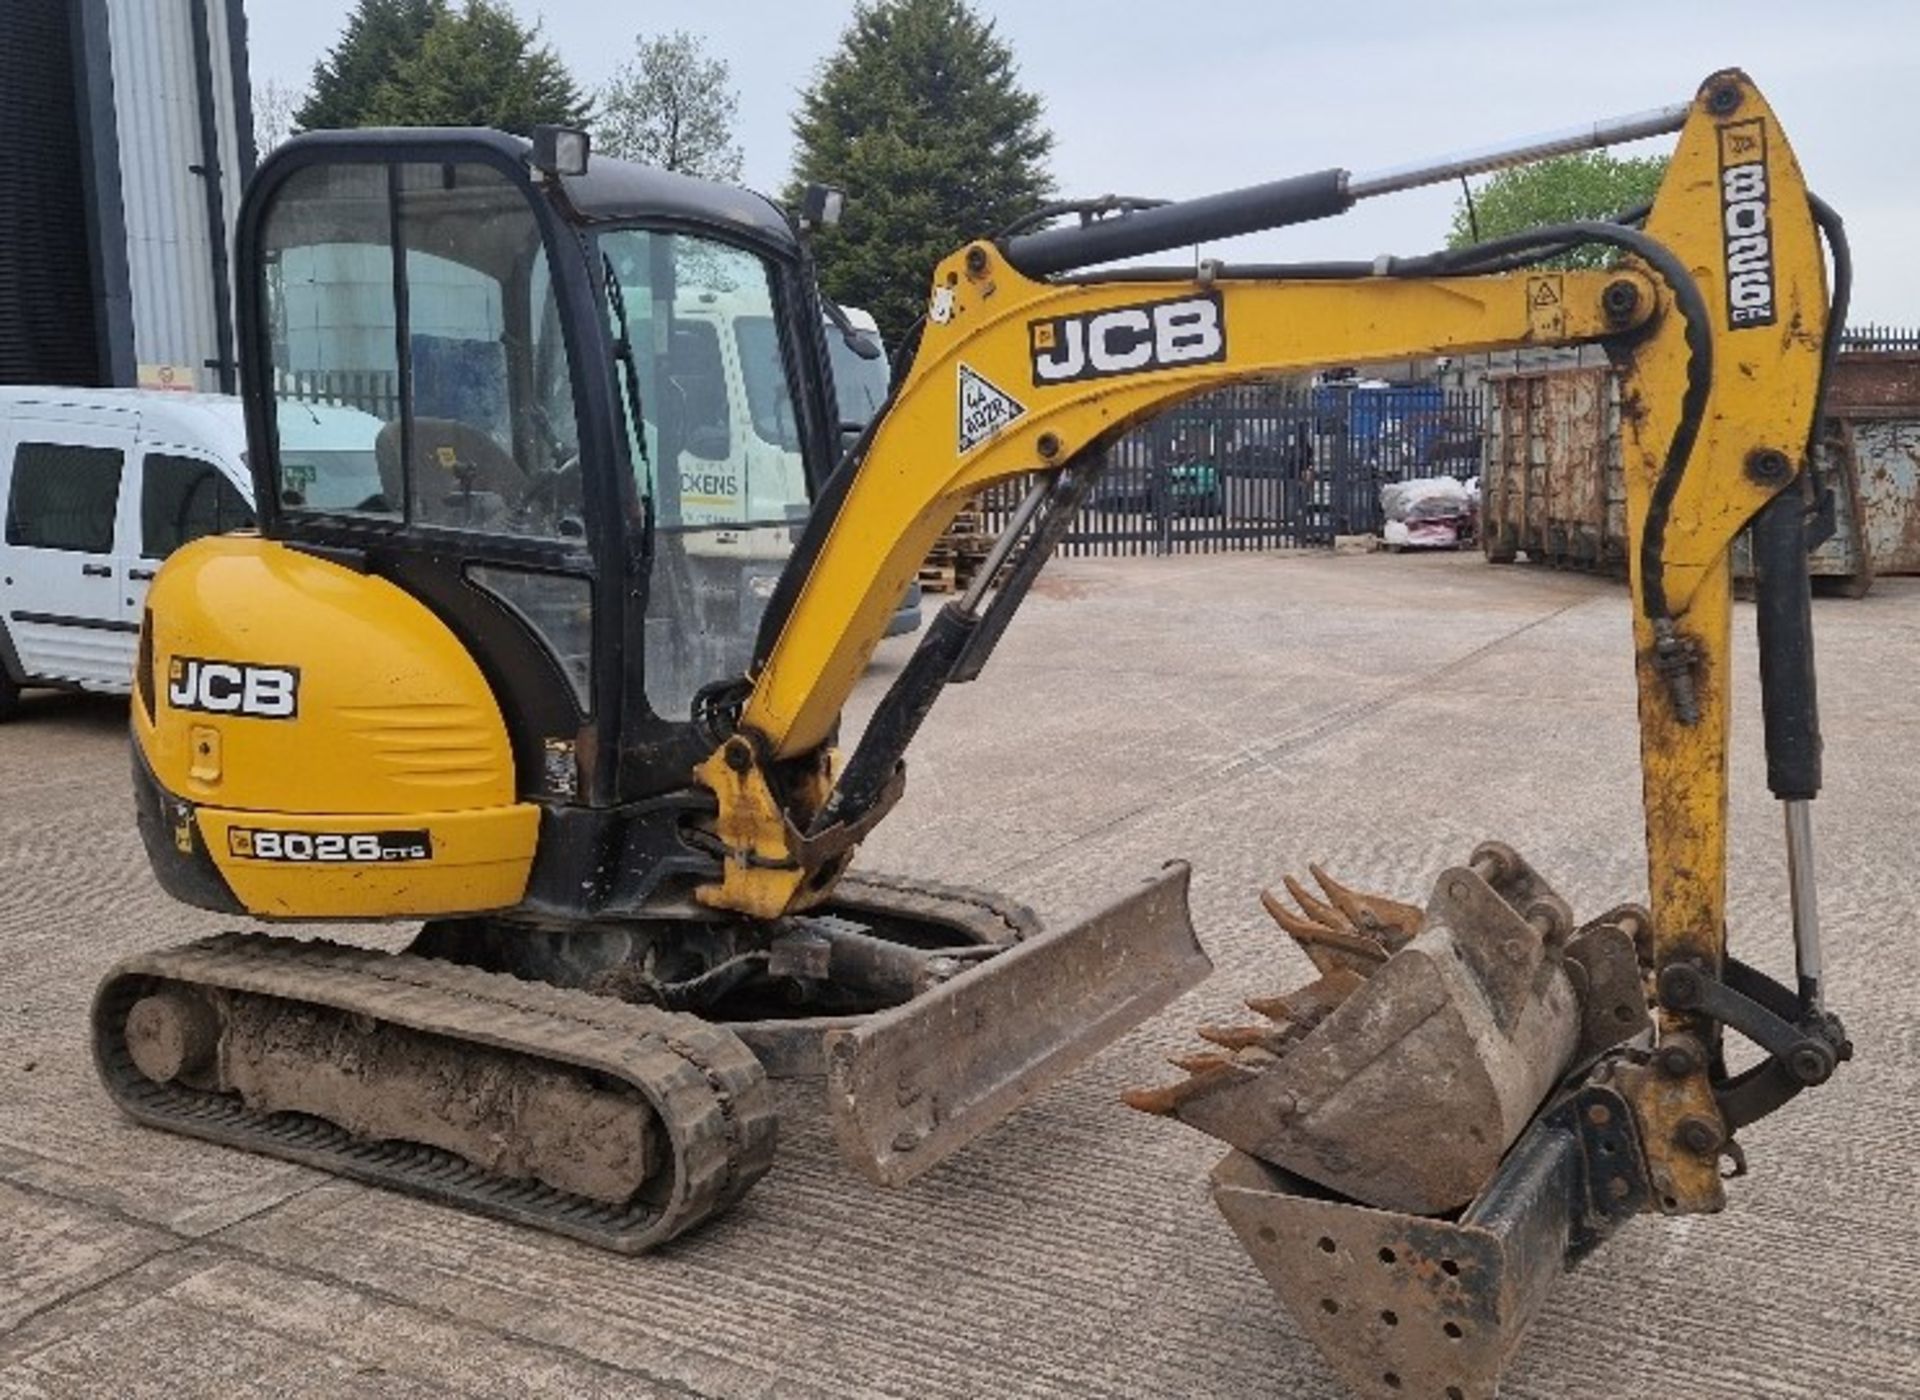 JCB 8026 CTS RUBBER TRACKED MINI EXCAVATOR WITH 3 BUCKETS, HRS 3213.8, YEAR 2017, SERIAL NUMBER - Image 2 of 7